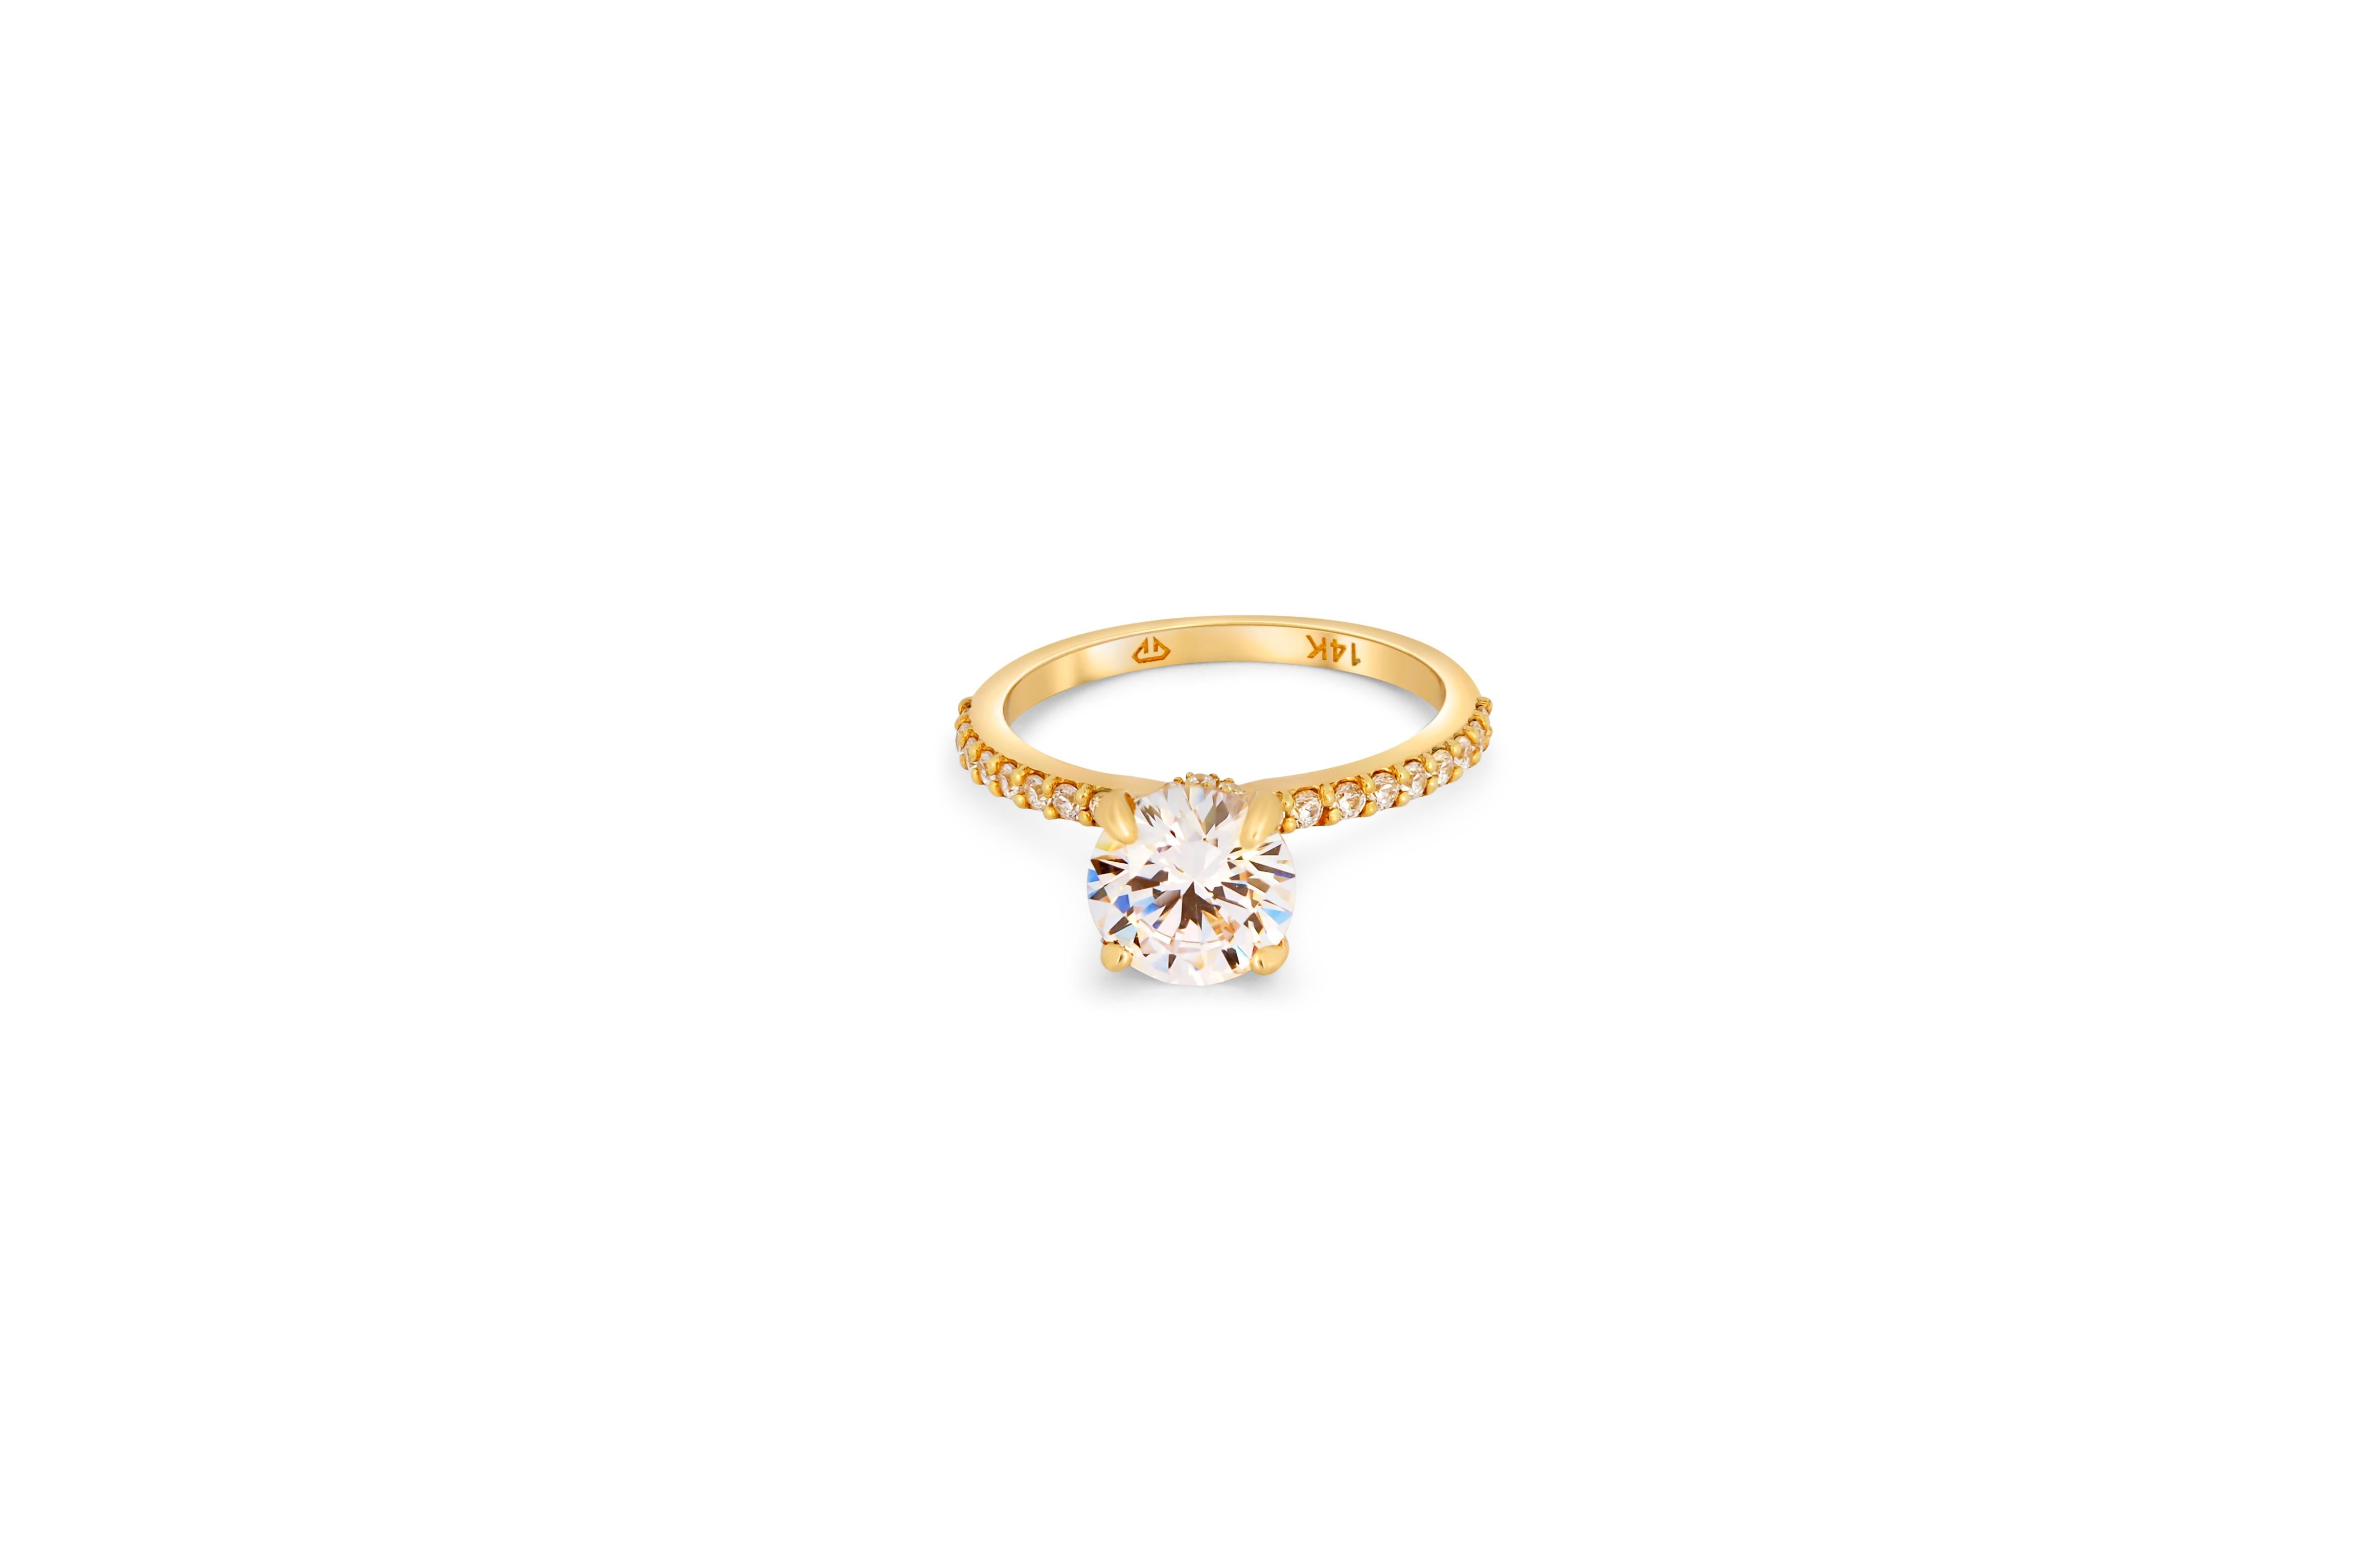 For Sale:  The Veiled Halo Round Brilliant Moissanite Engagement 14k Gold Ring.  2